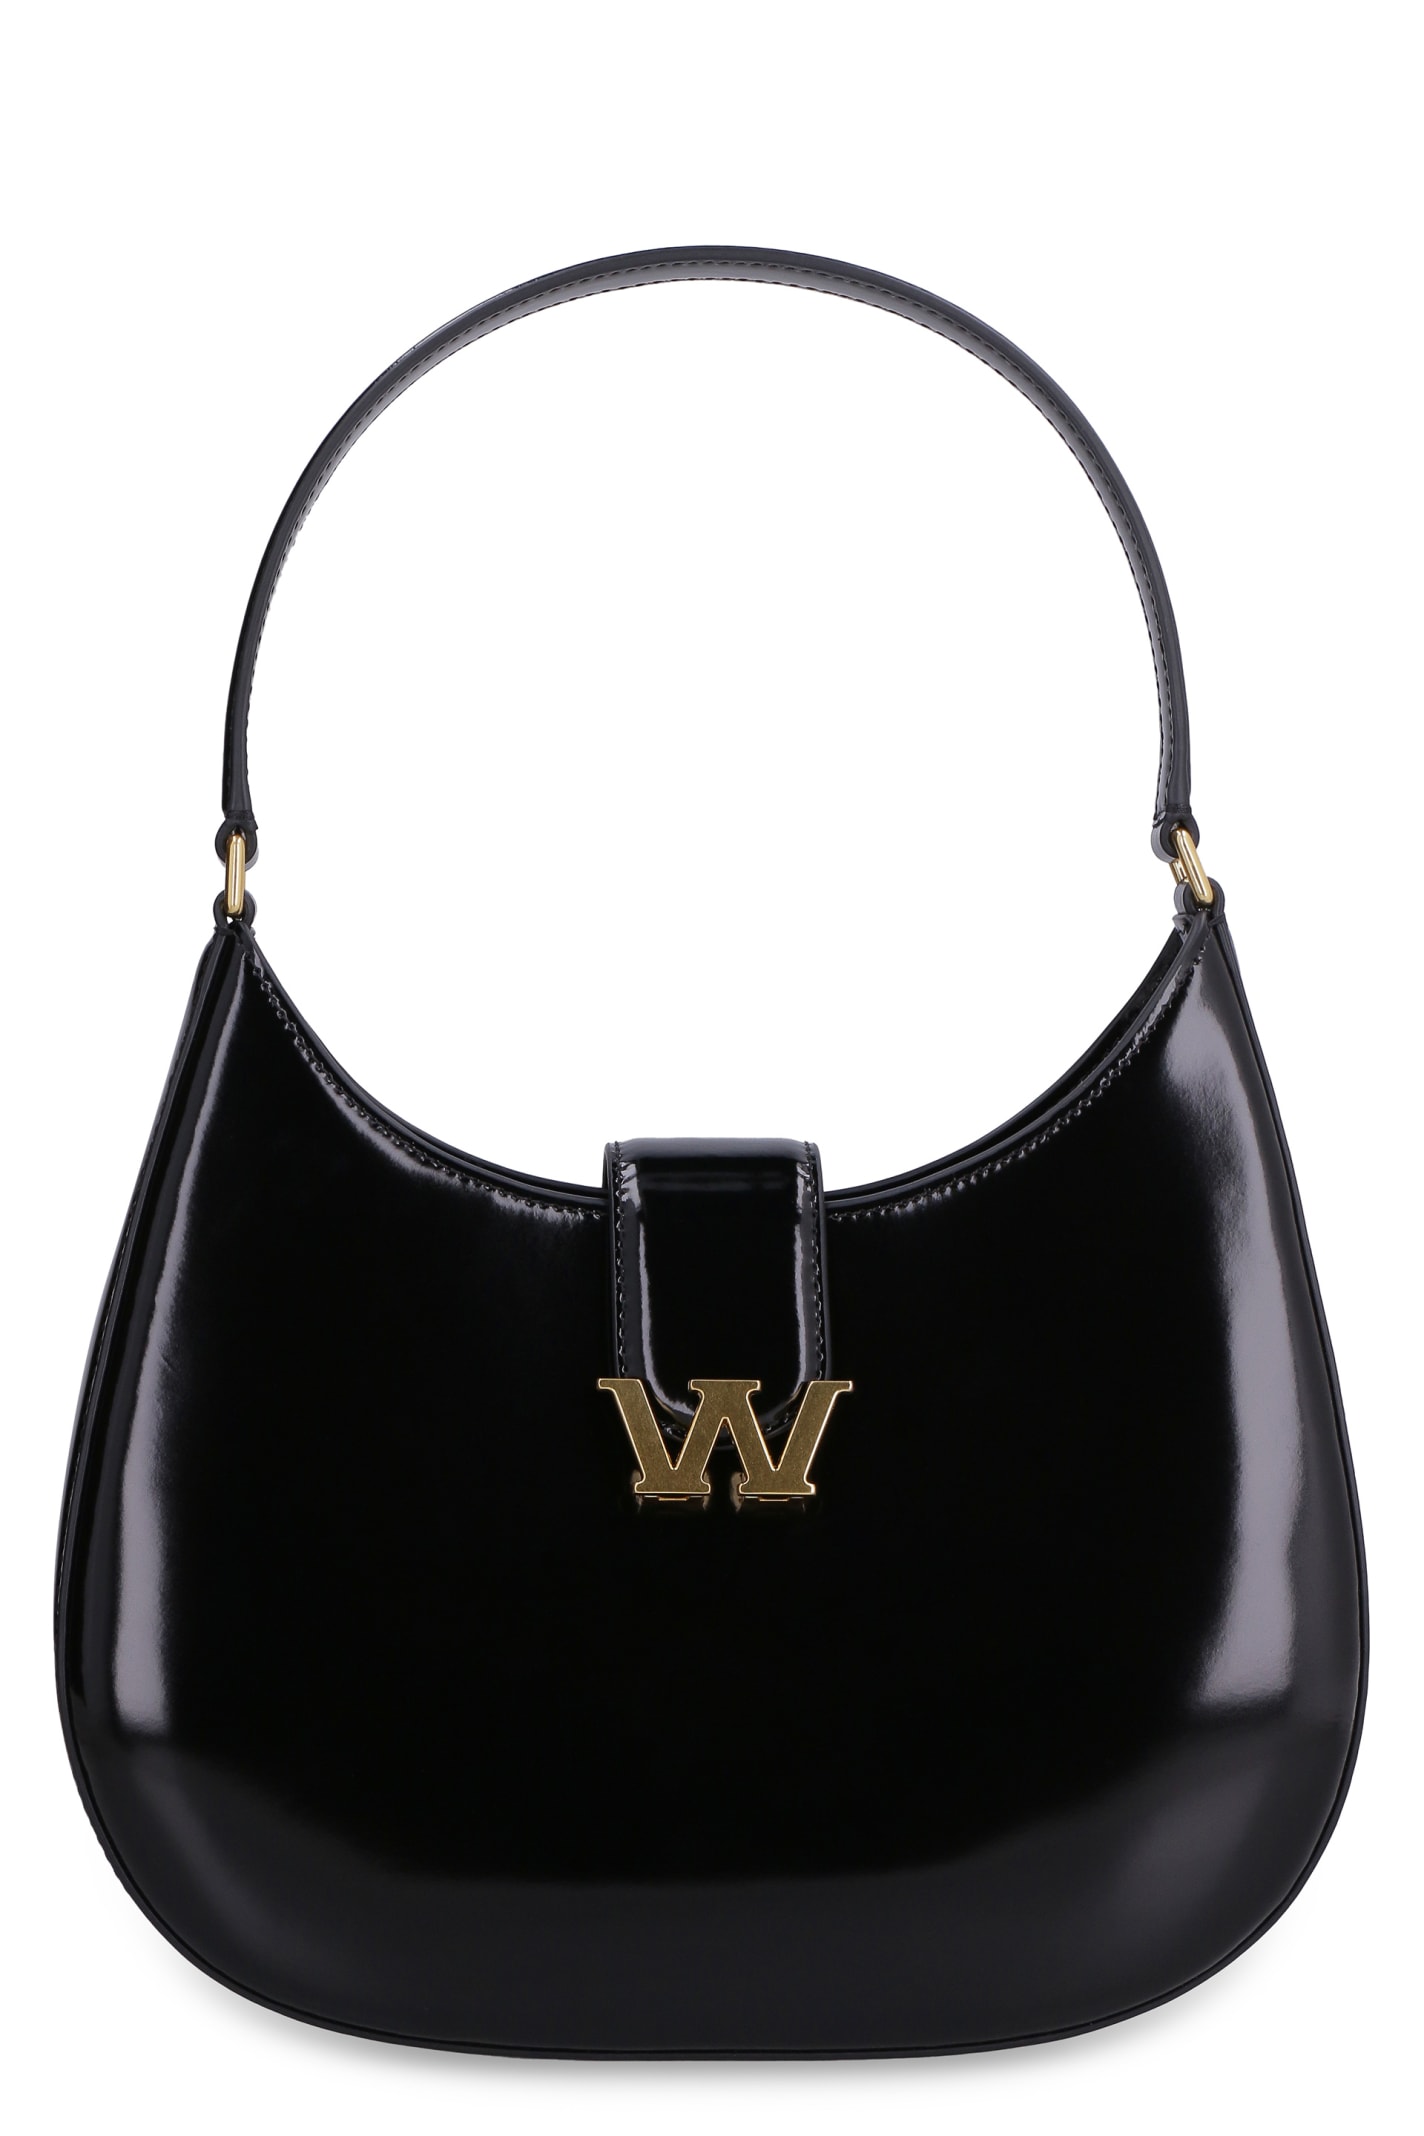 Alexander Wang Large Leather Hobo Bag With Embossed W Logo